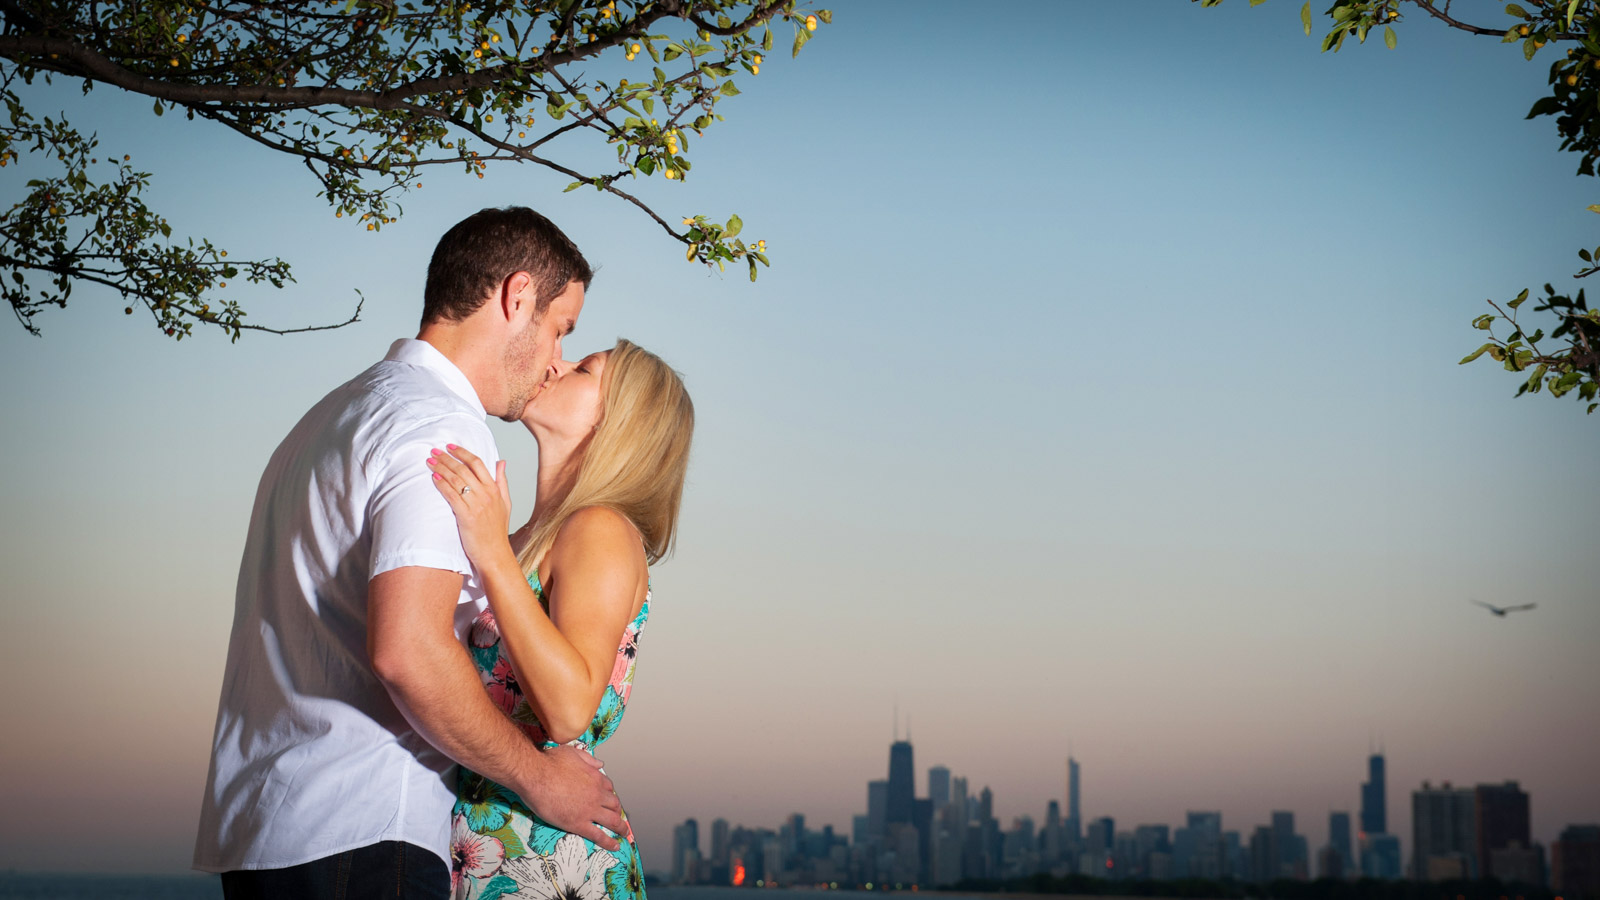 Chicago engagement session at sunrise on Lake Michigan with Chicago Skyline in the background